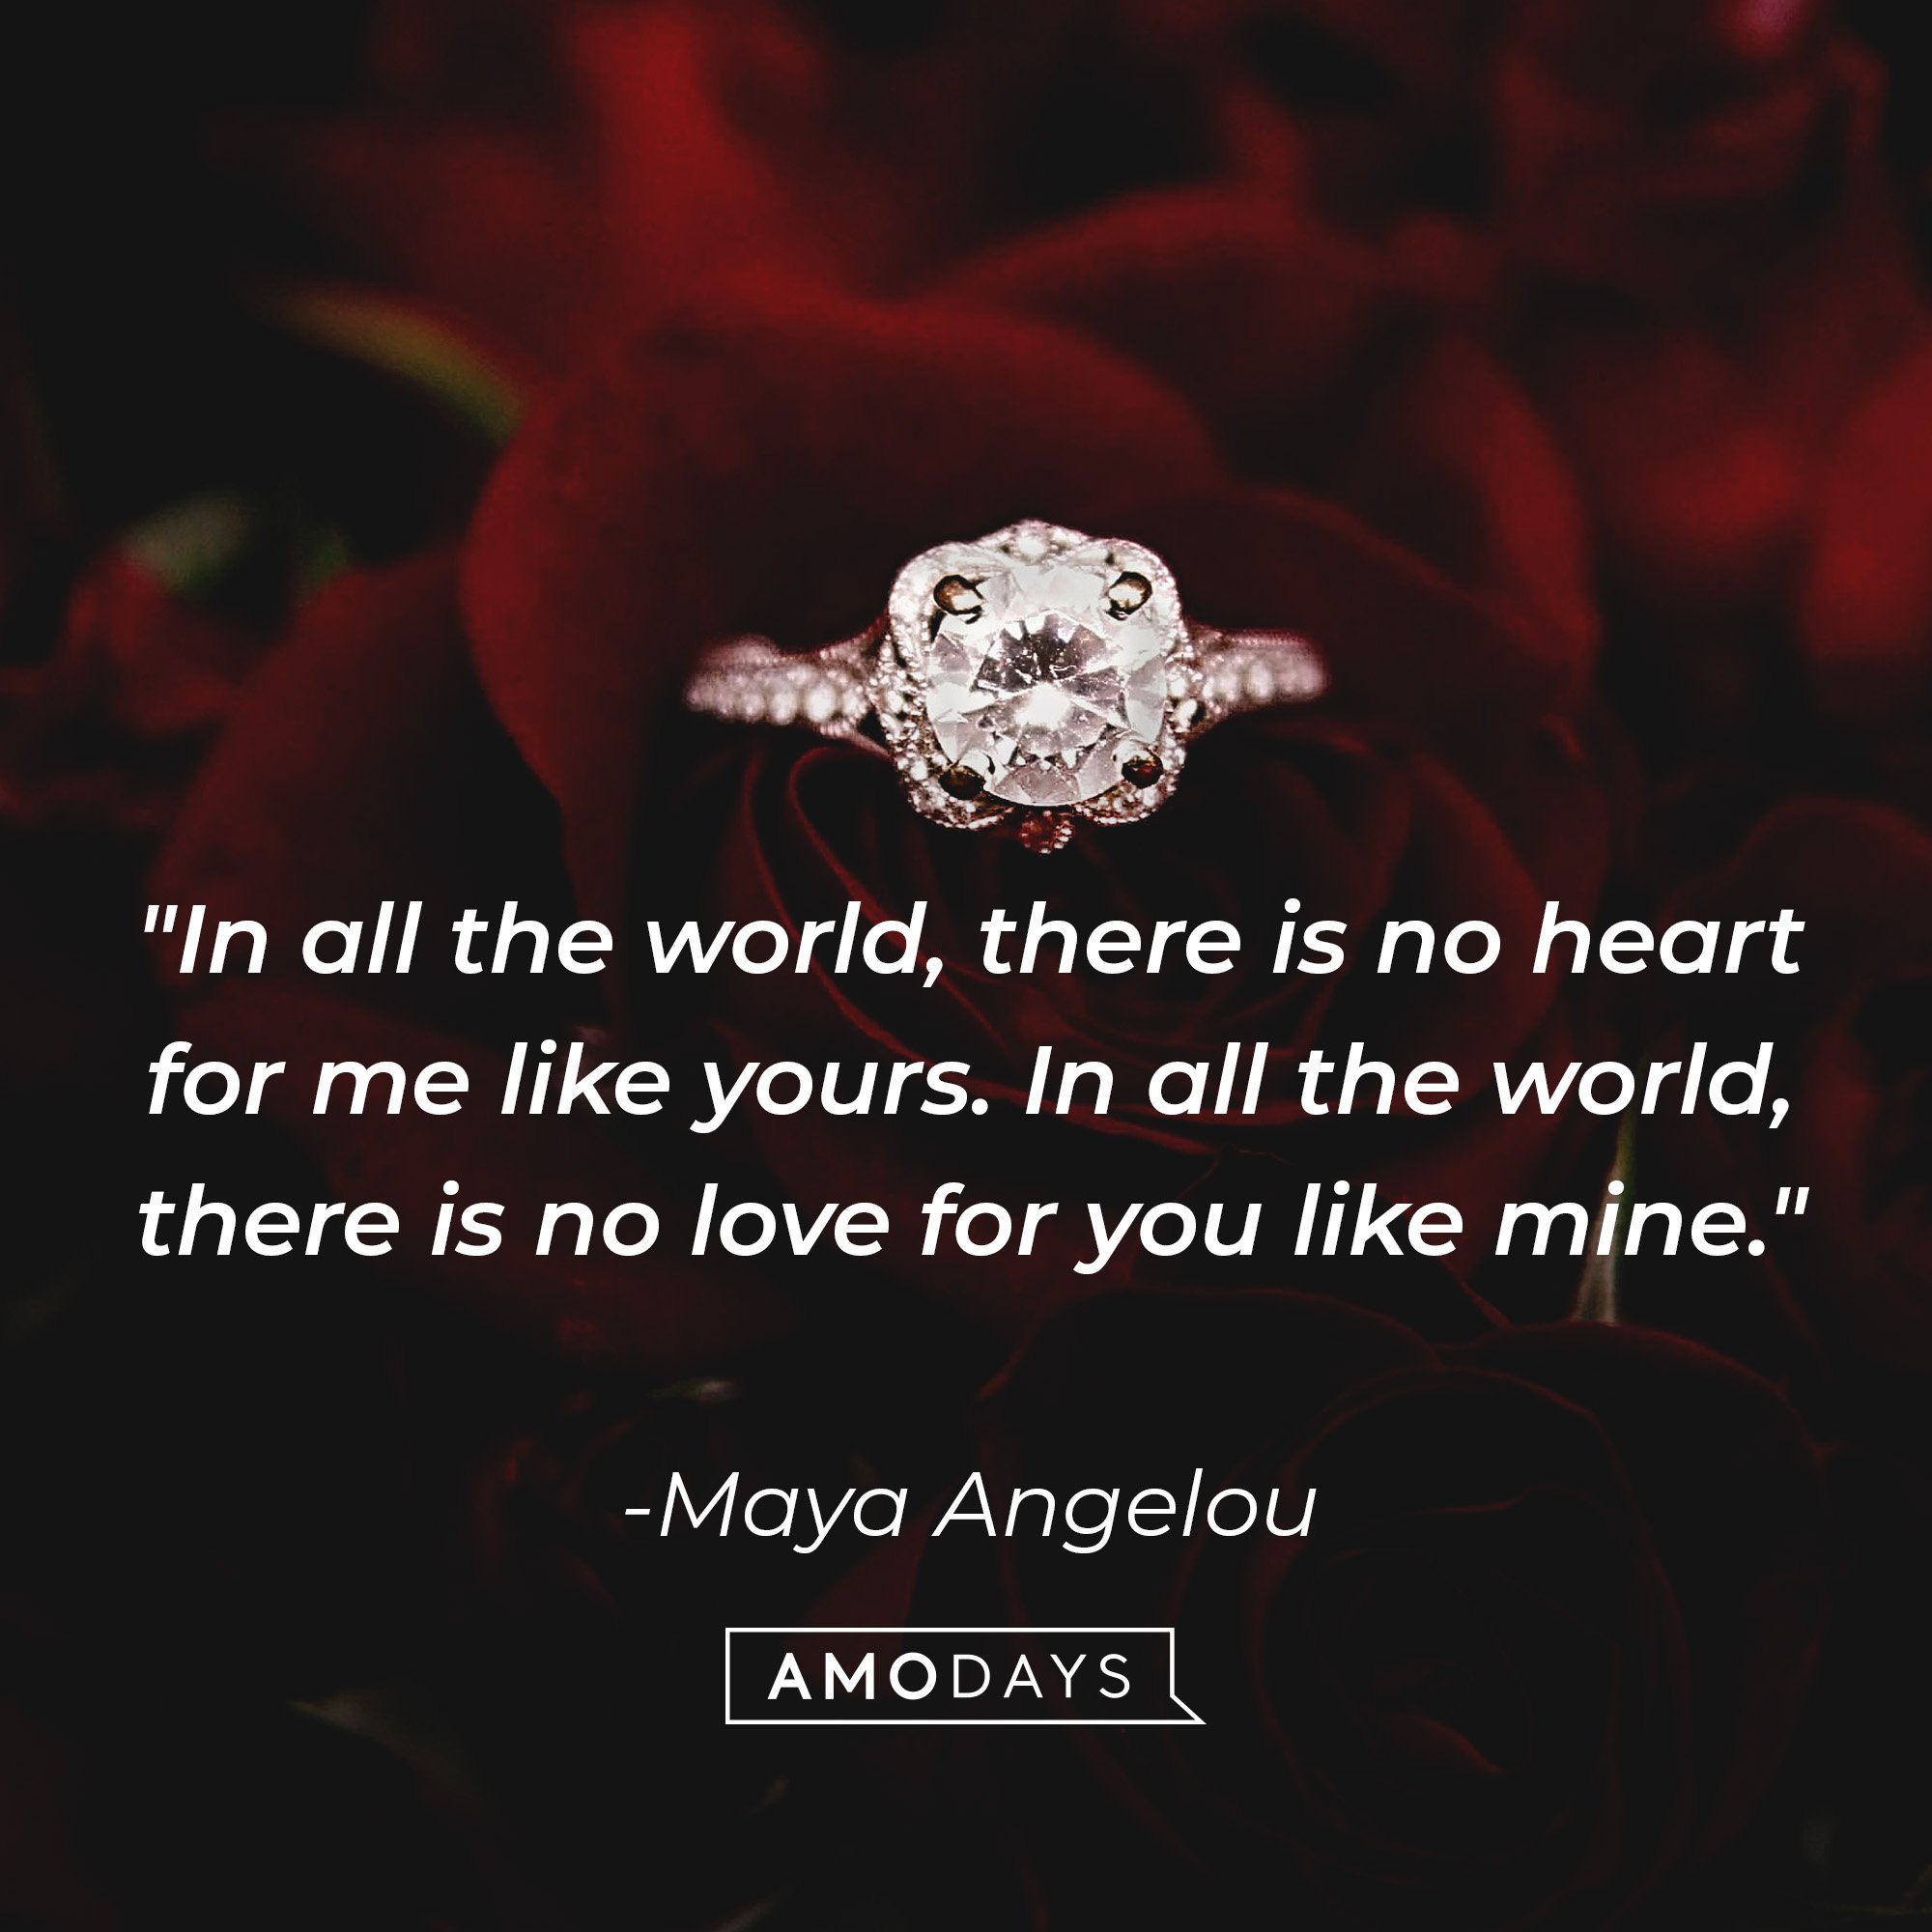 Maya Angelou's quote: "In all the world, there is no heart for me like yours. In all the world, there is no love for you like mine." | Image: AmoDays